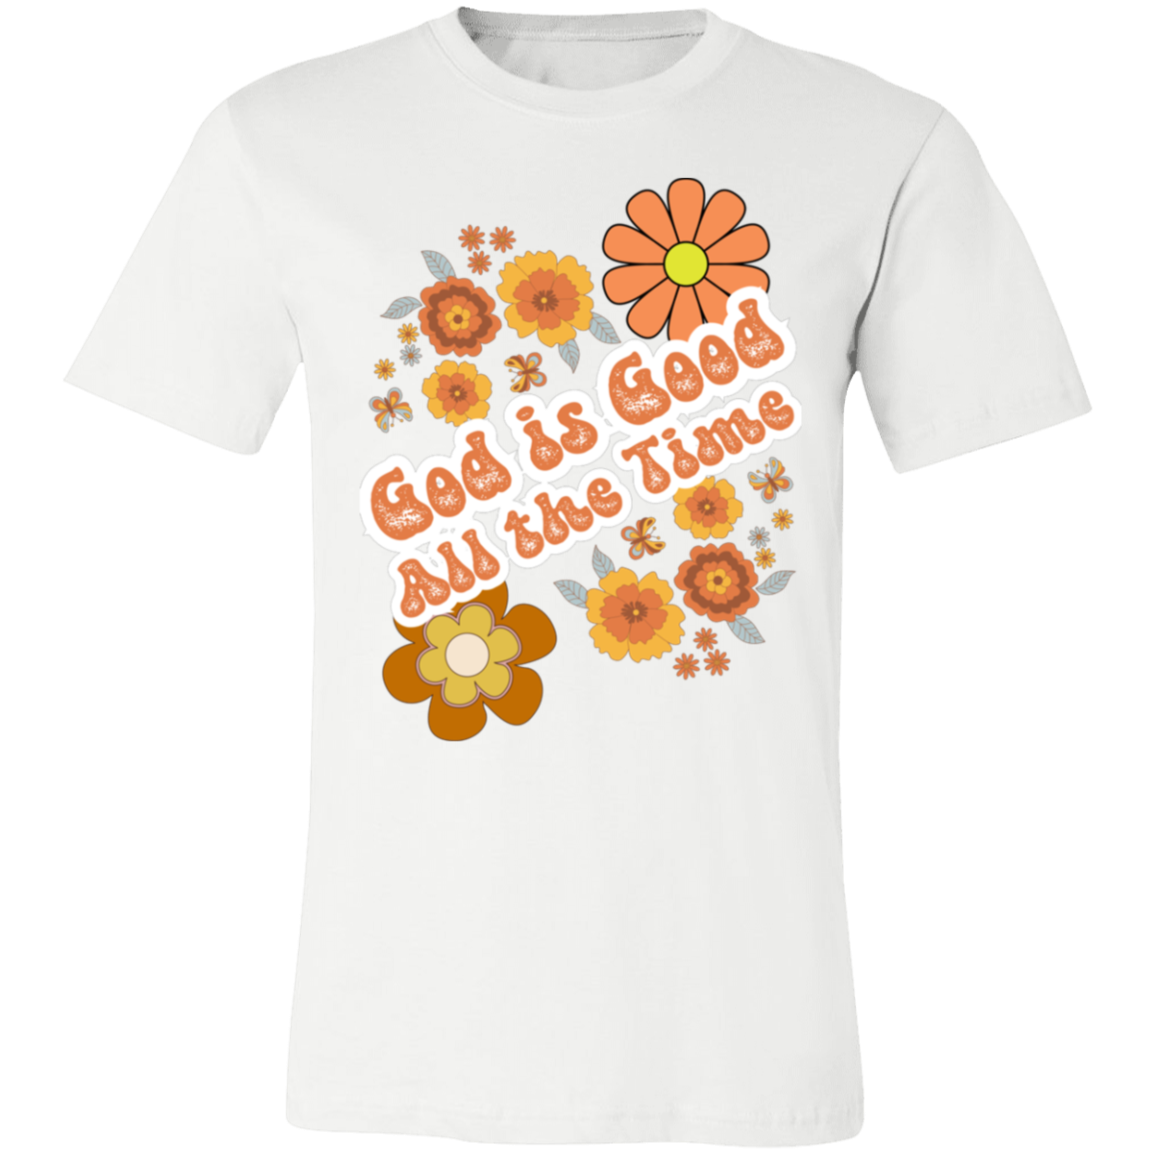 God is Good, All the Time - T-shirt